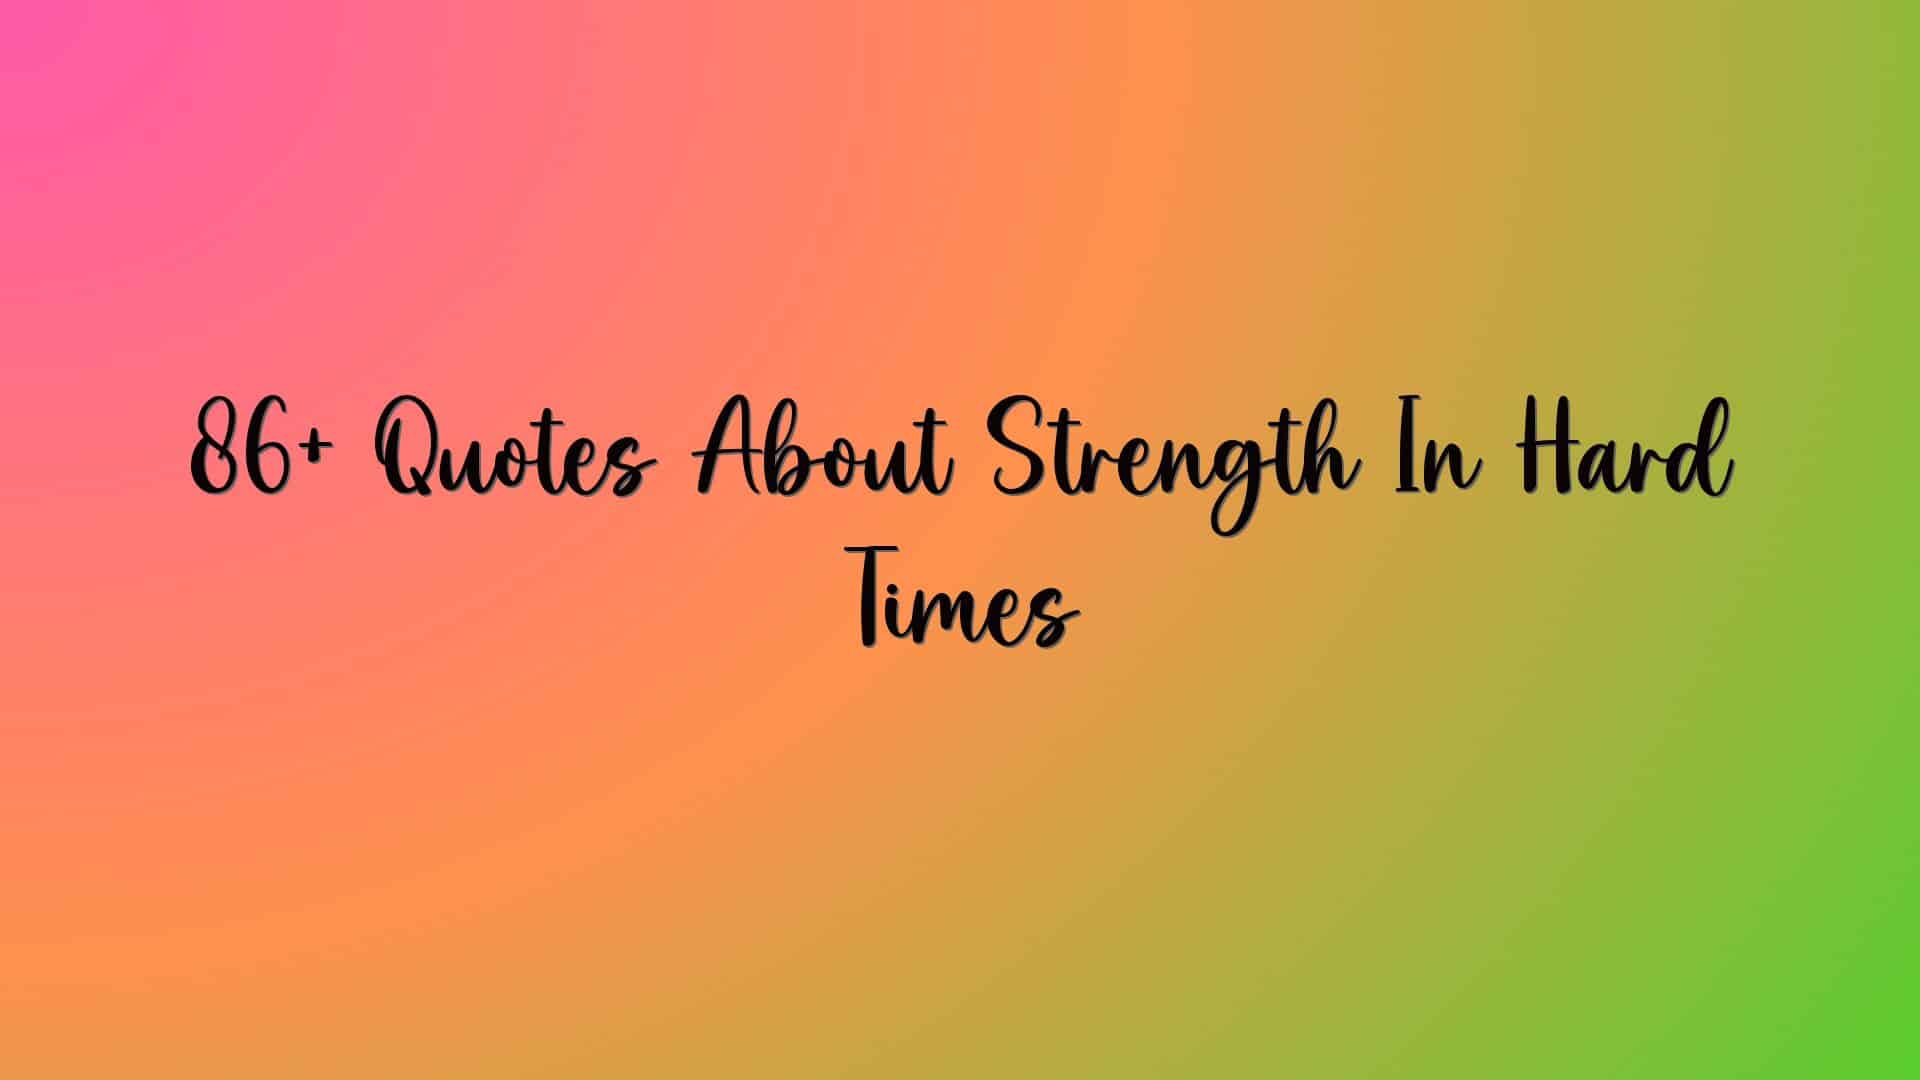 86+ Quotes About Strength In Hard Times